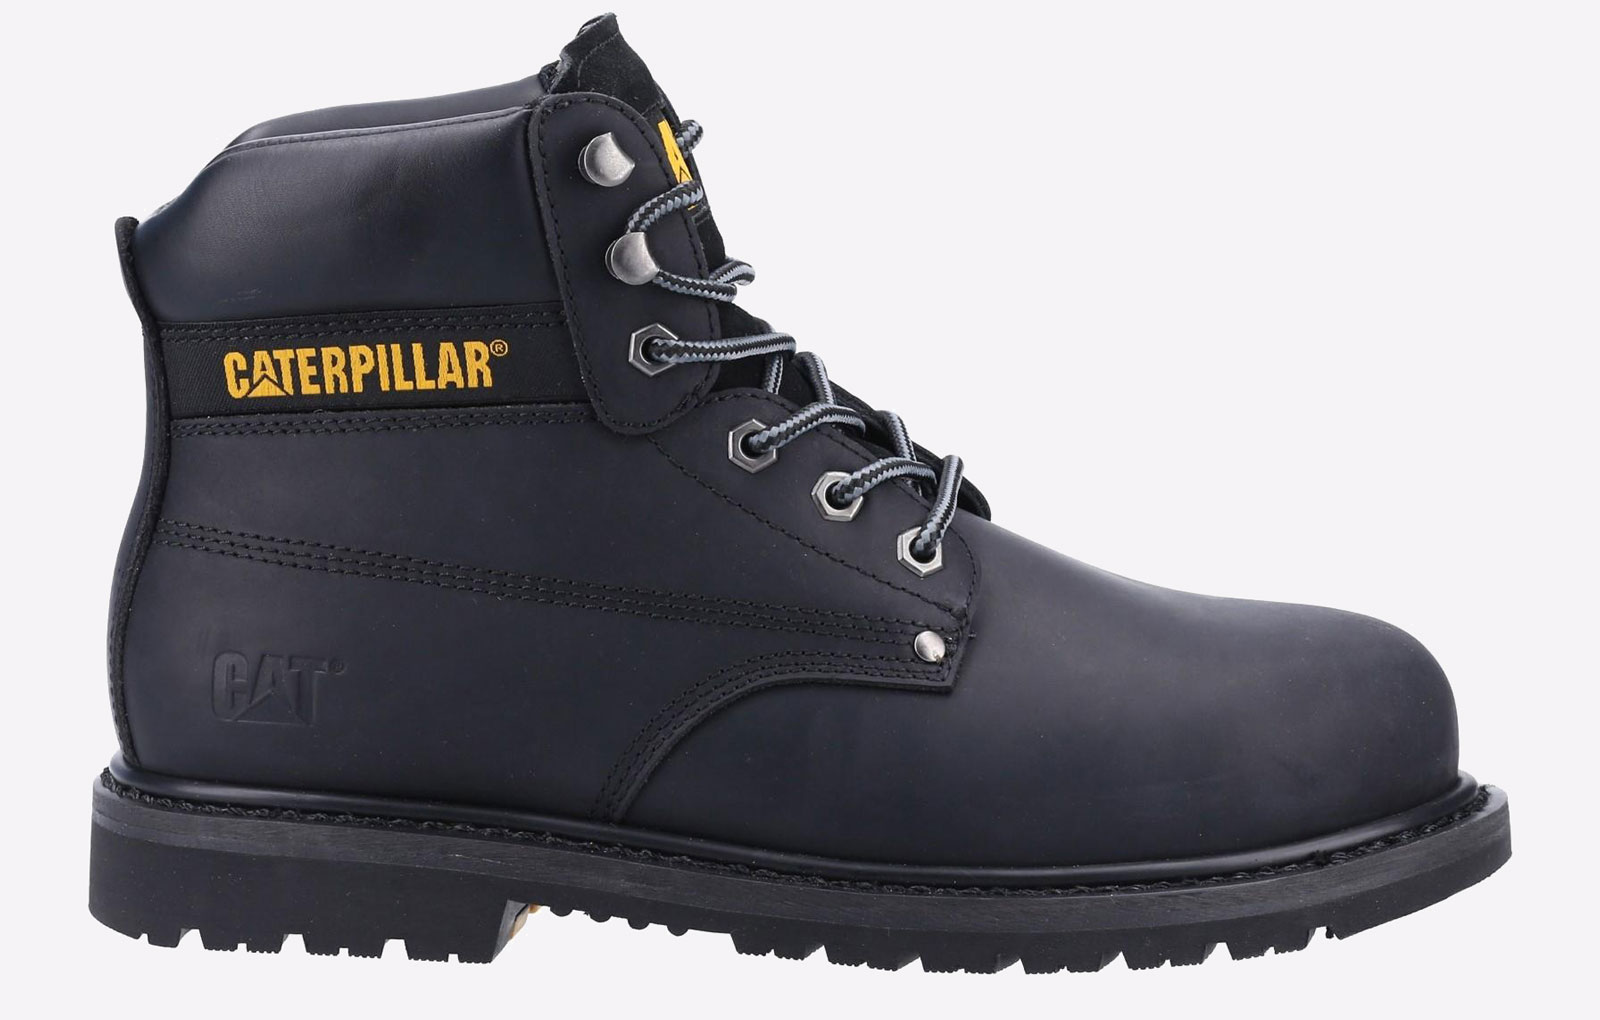 Caterpillar Powerplant S3 GYW Safety Boots Mens - GRD-32630-55773-11